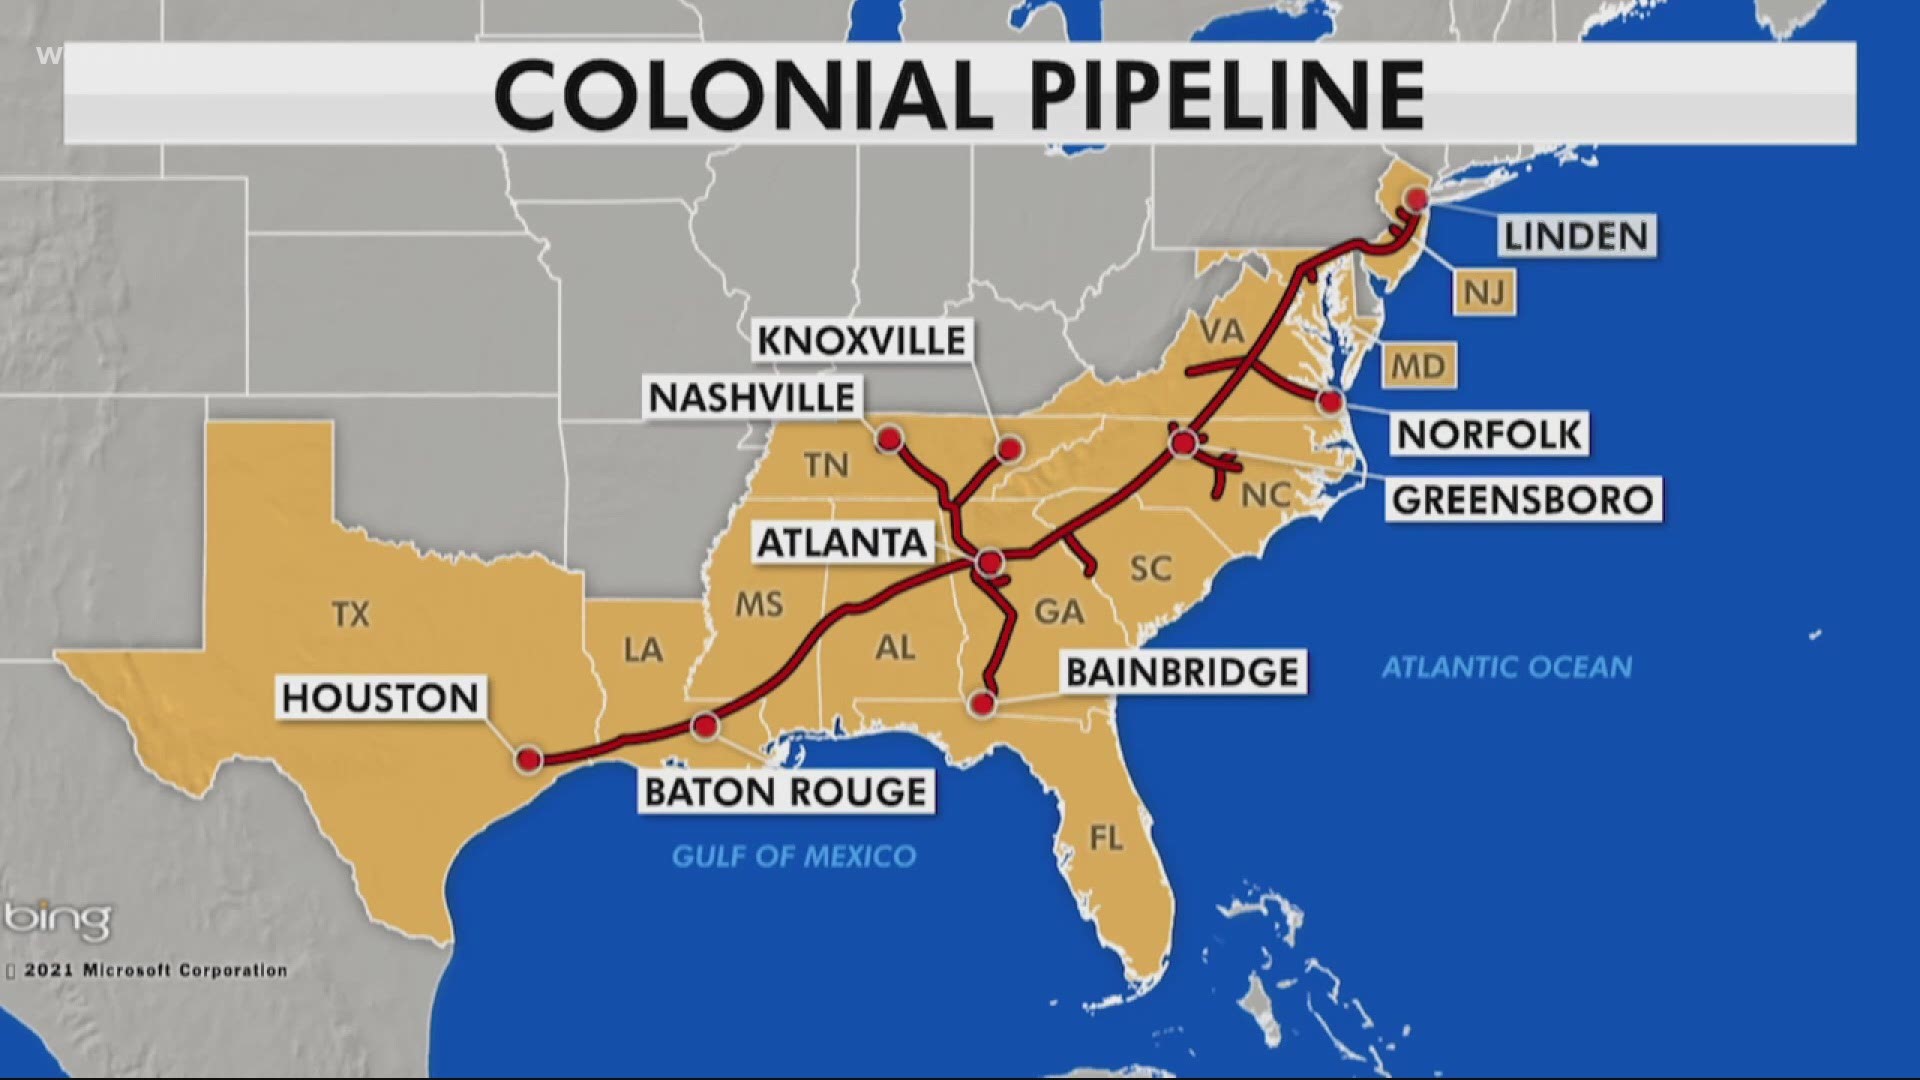 North Carolina continues to recover from the colonial pipeline shutdown